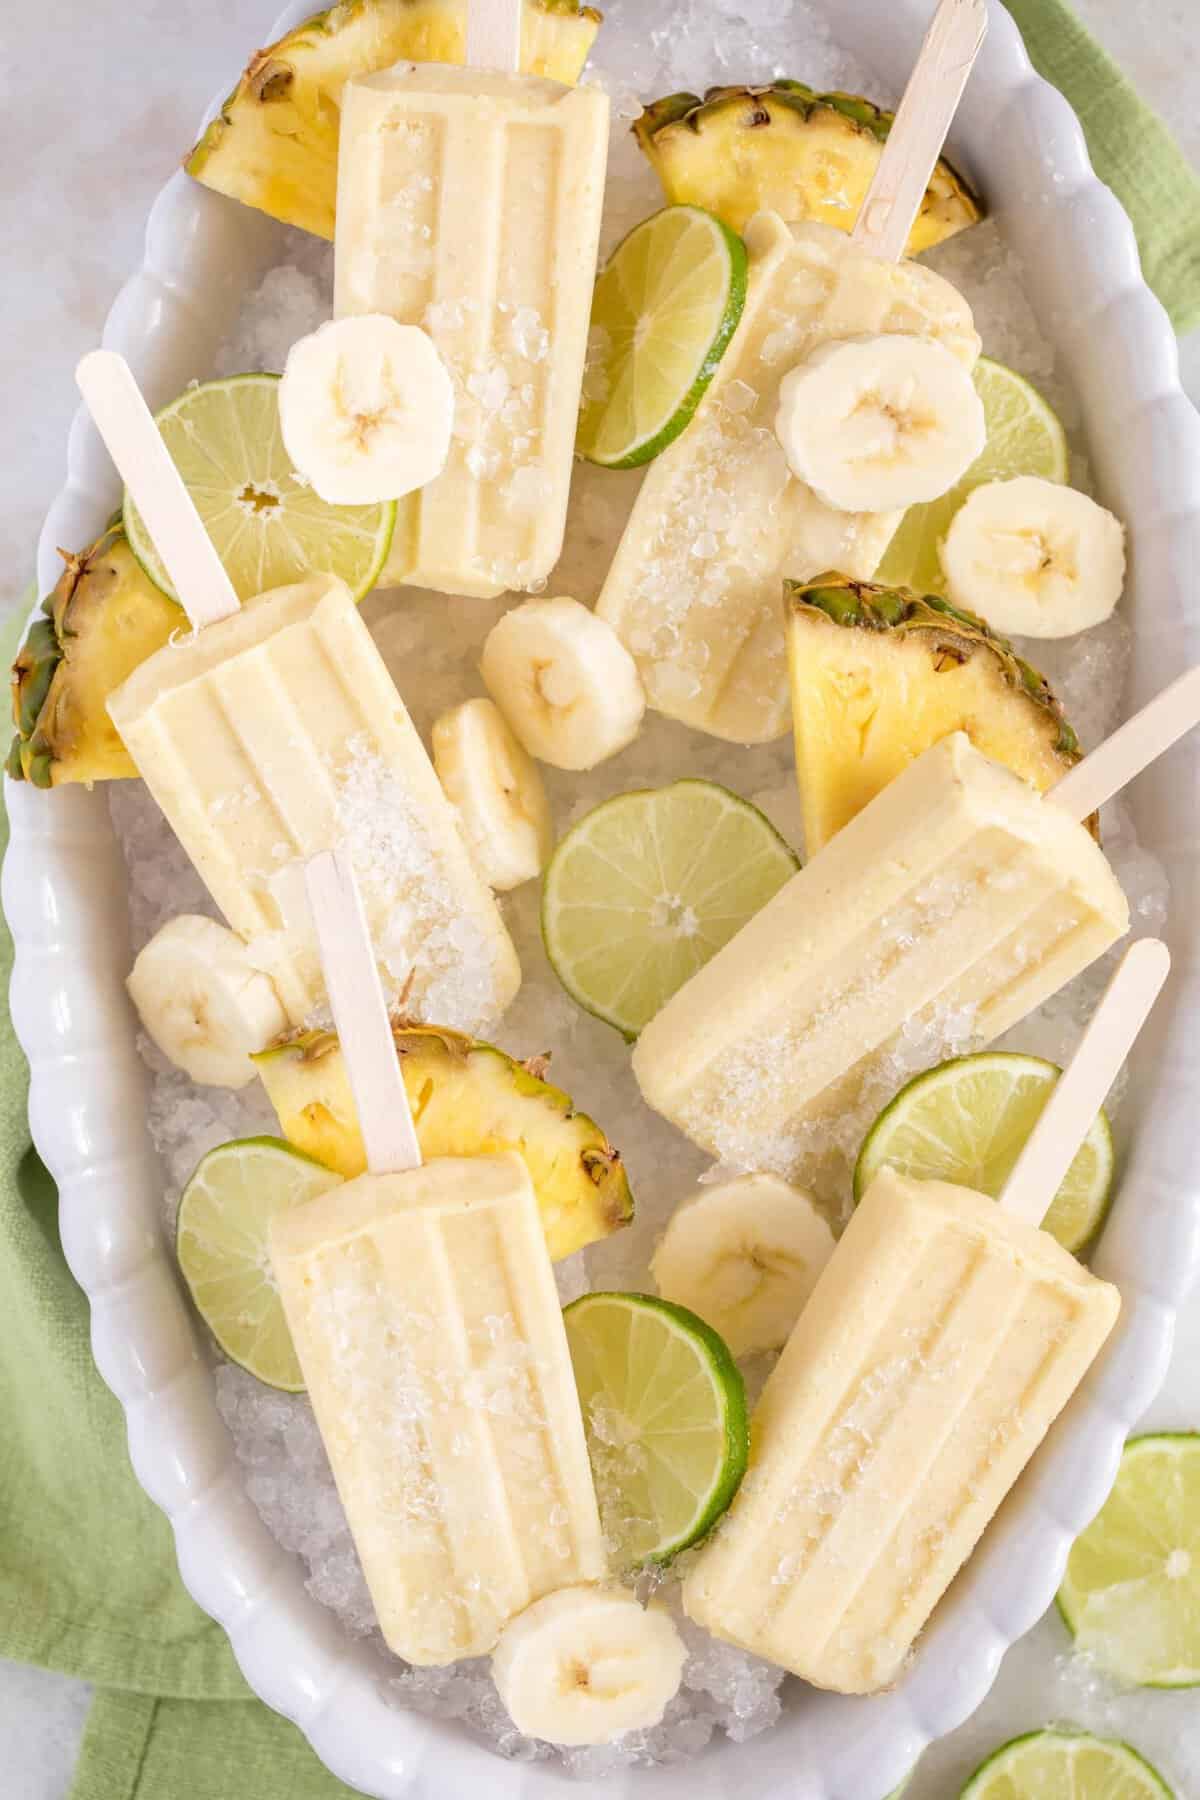 These easy-to-make Pineapple Banana Popsicles are made with fresh bananas, pineapple, pineapple juice and coconut milk